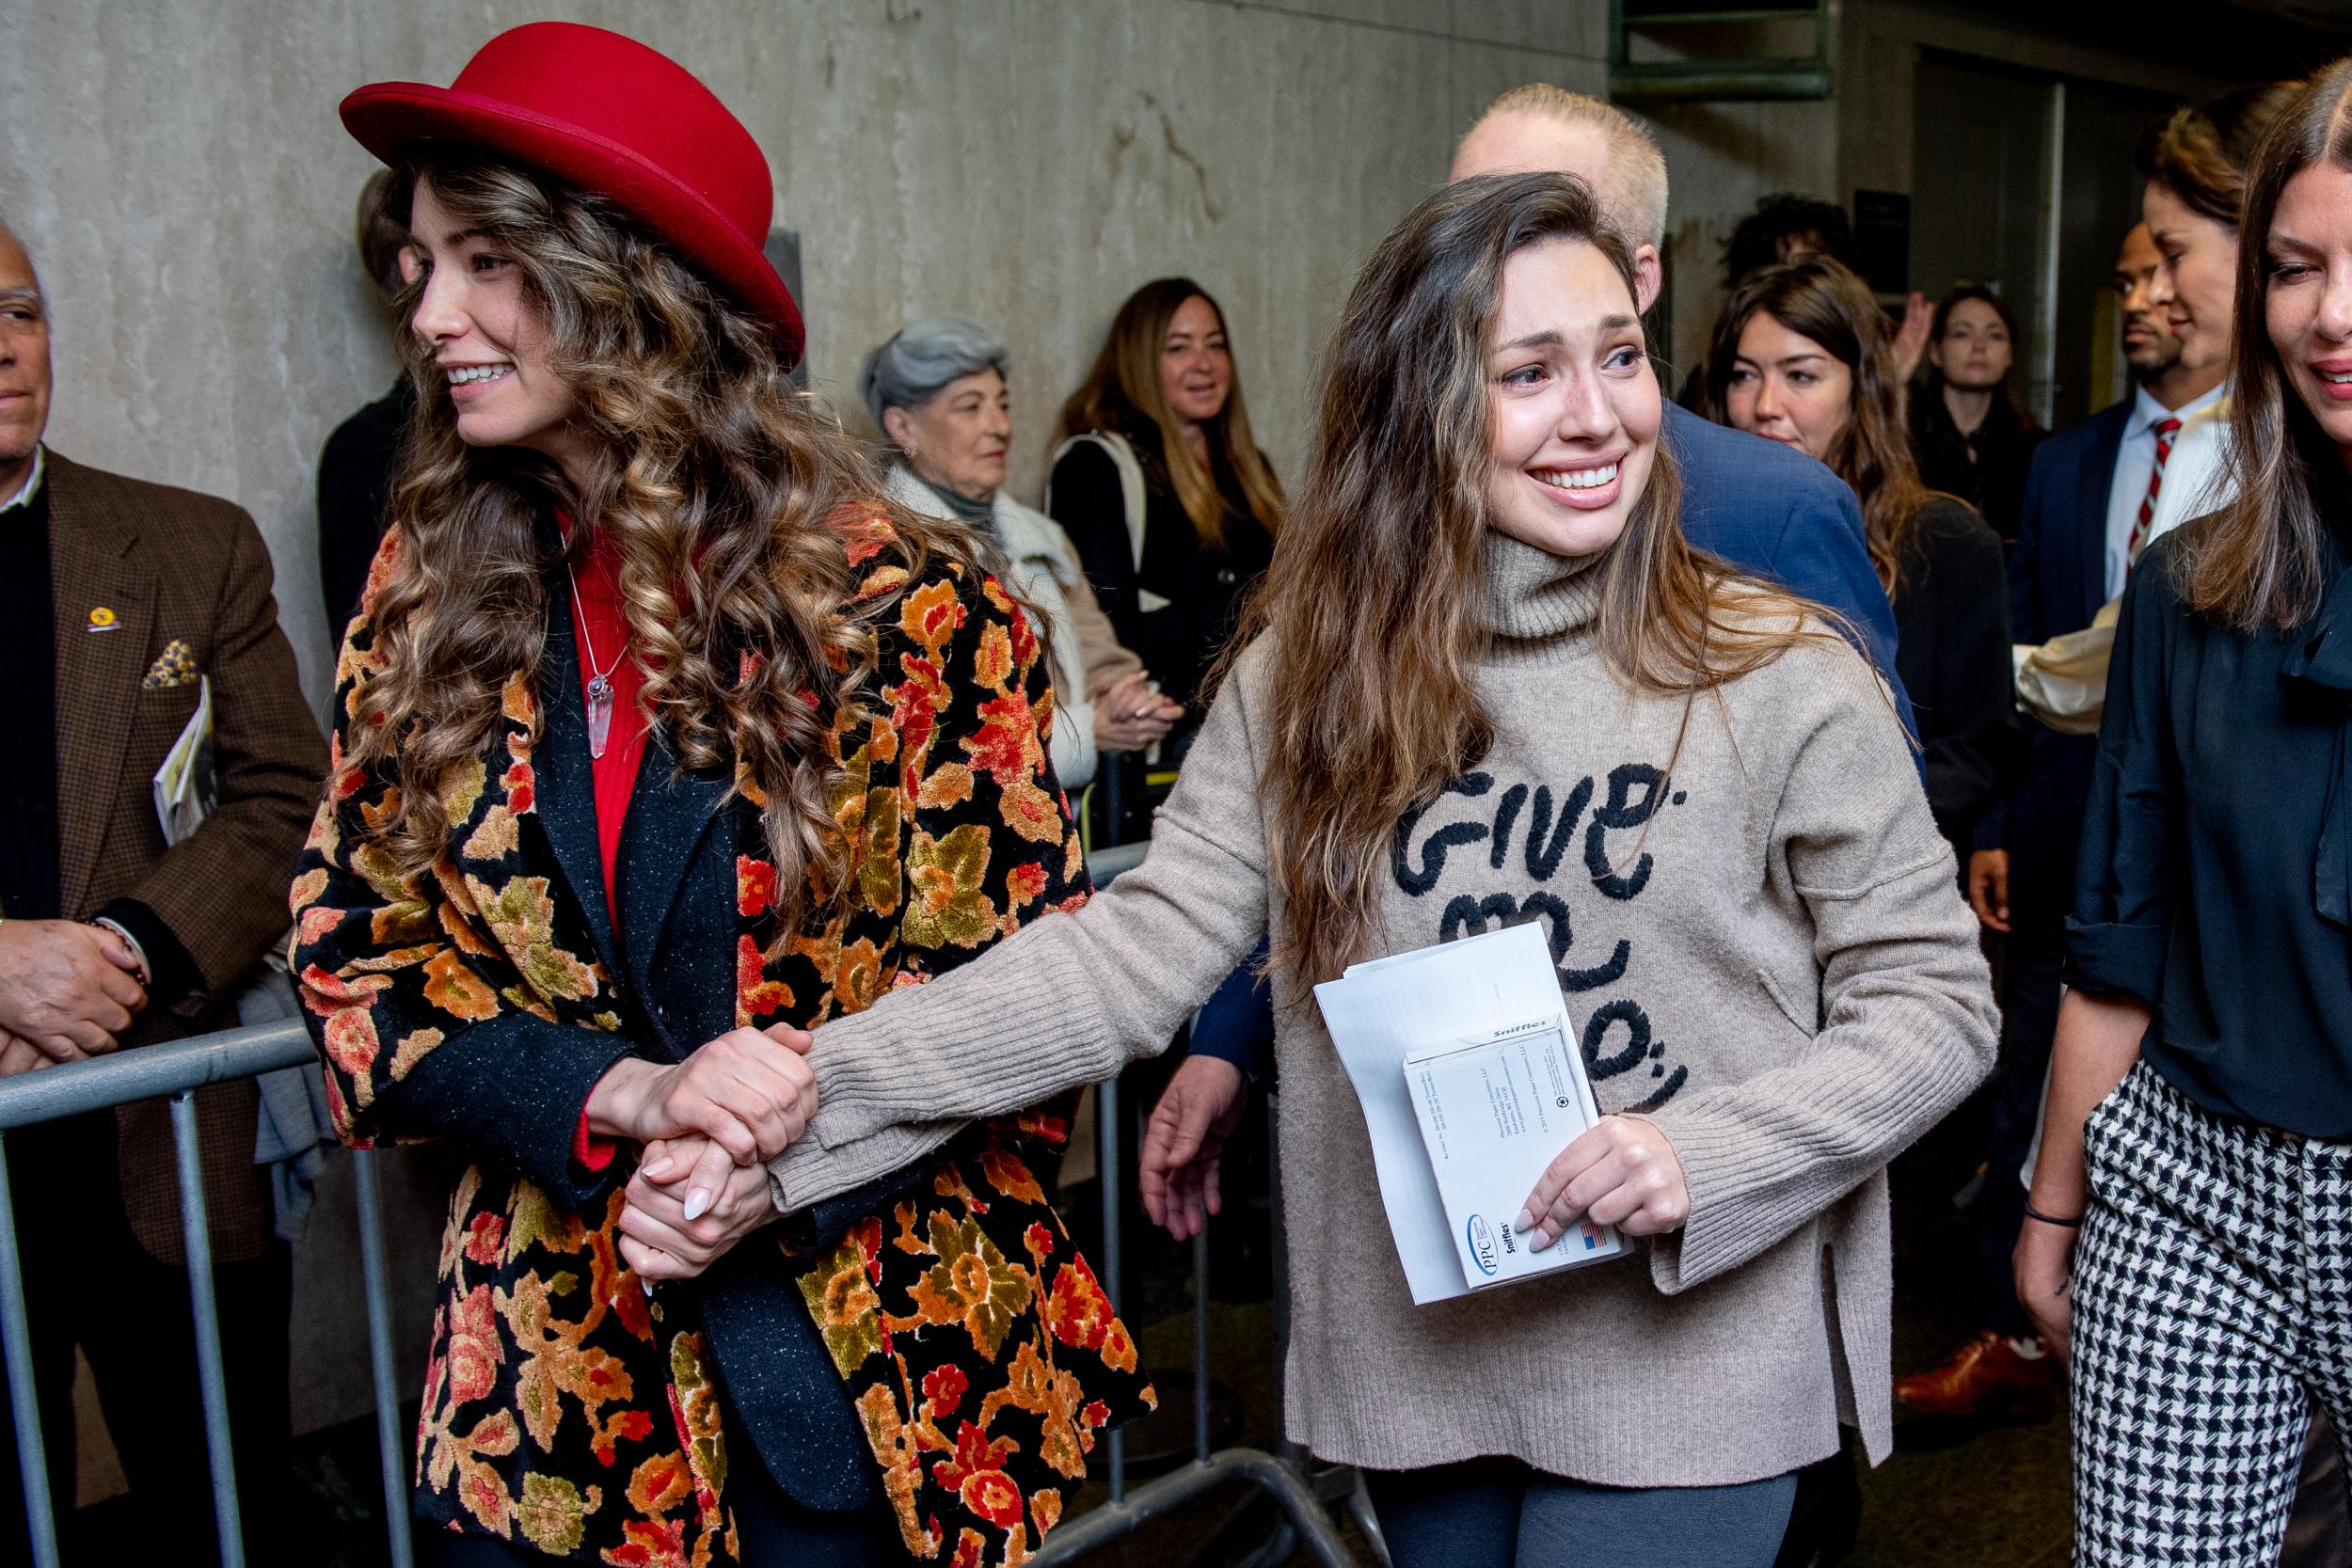 Lauren Young (L) and Jessica Mann (R) walk out of the courtroom after Weinstein was sentenced to 23 years in prison on 11 March 2020 in New York City.